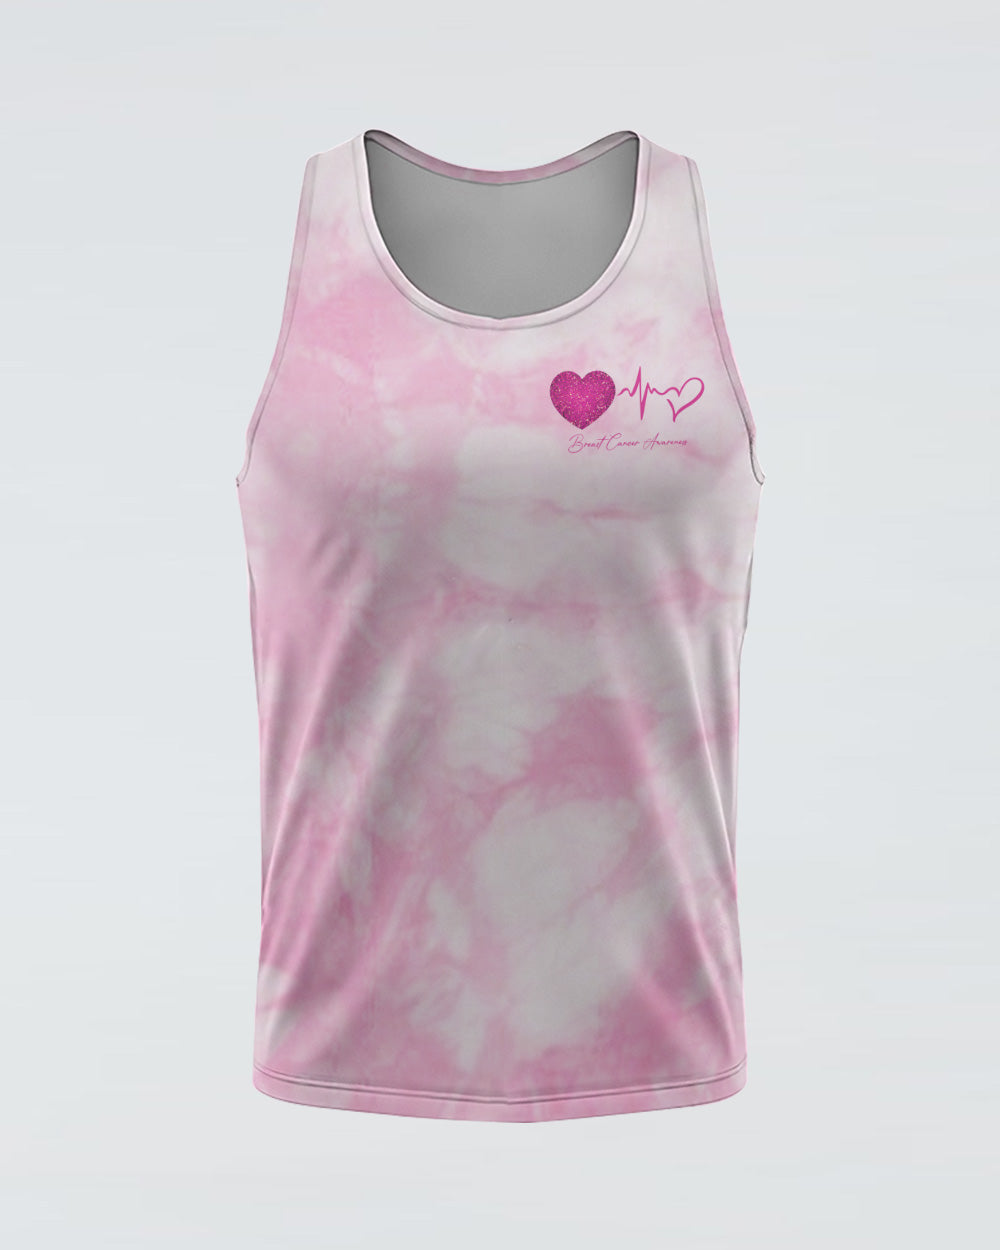 Think Pink Love Pink Wear Pink Women's Breast Cancer Awareness Tanks